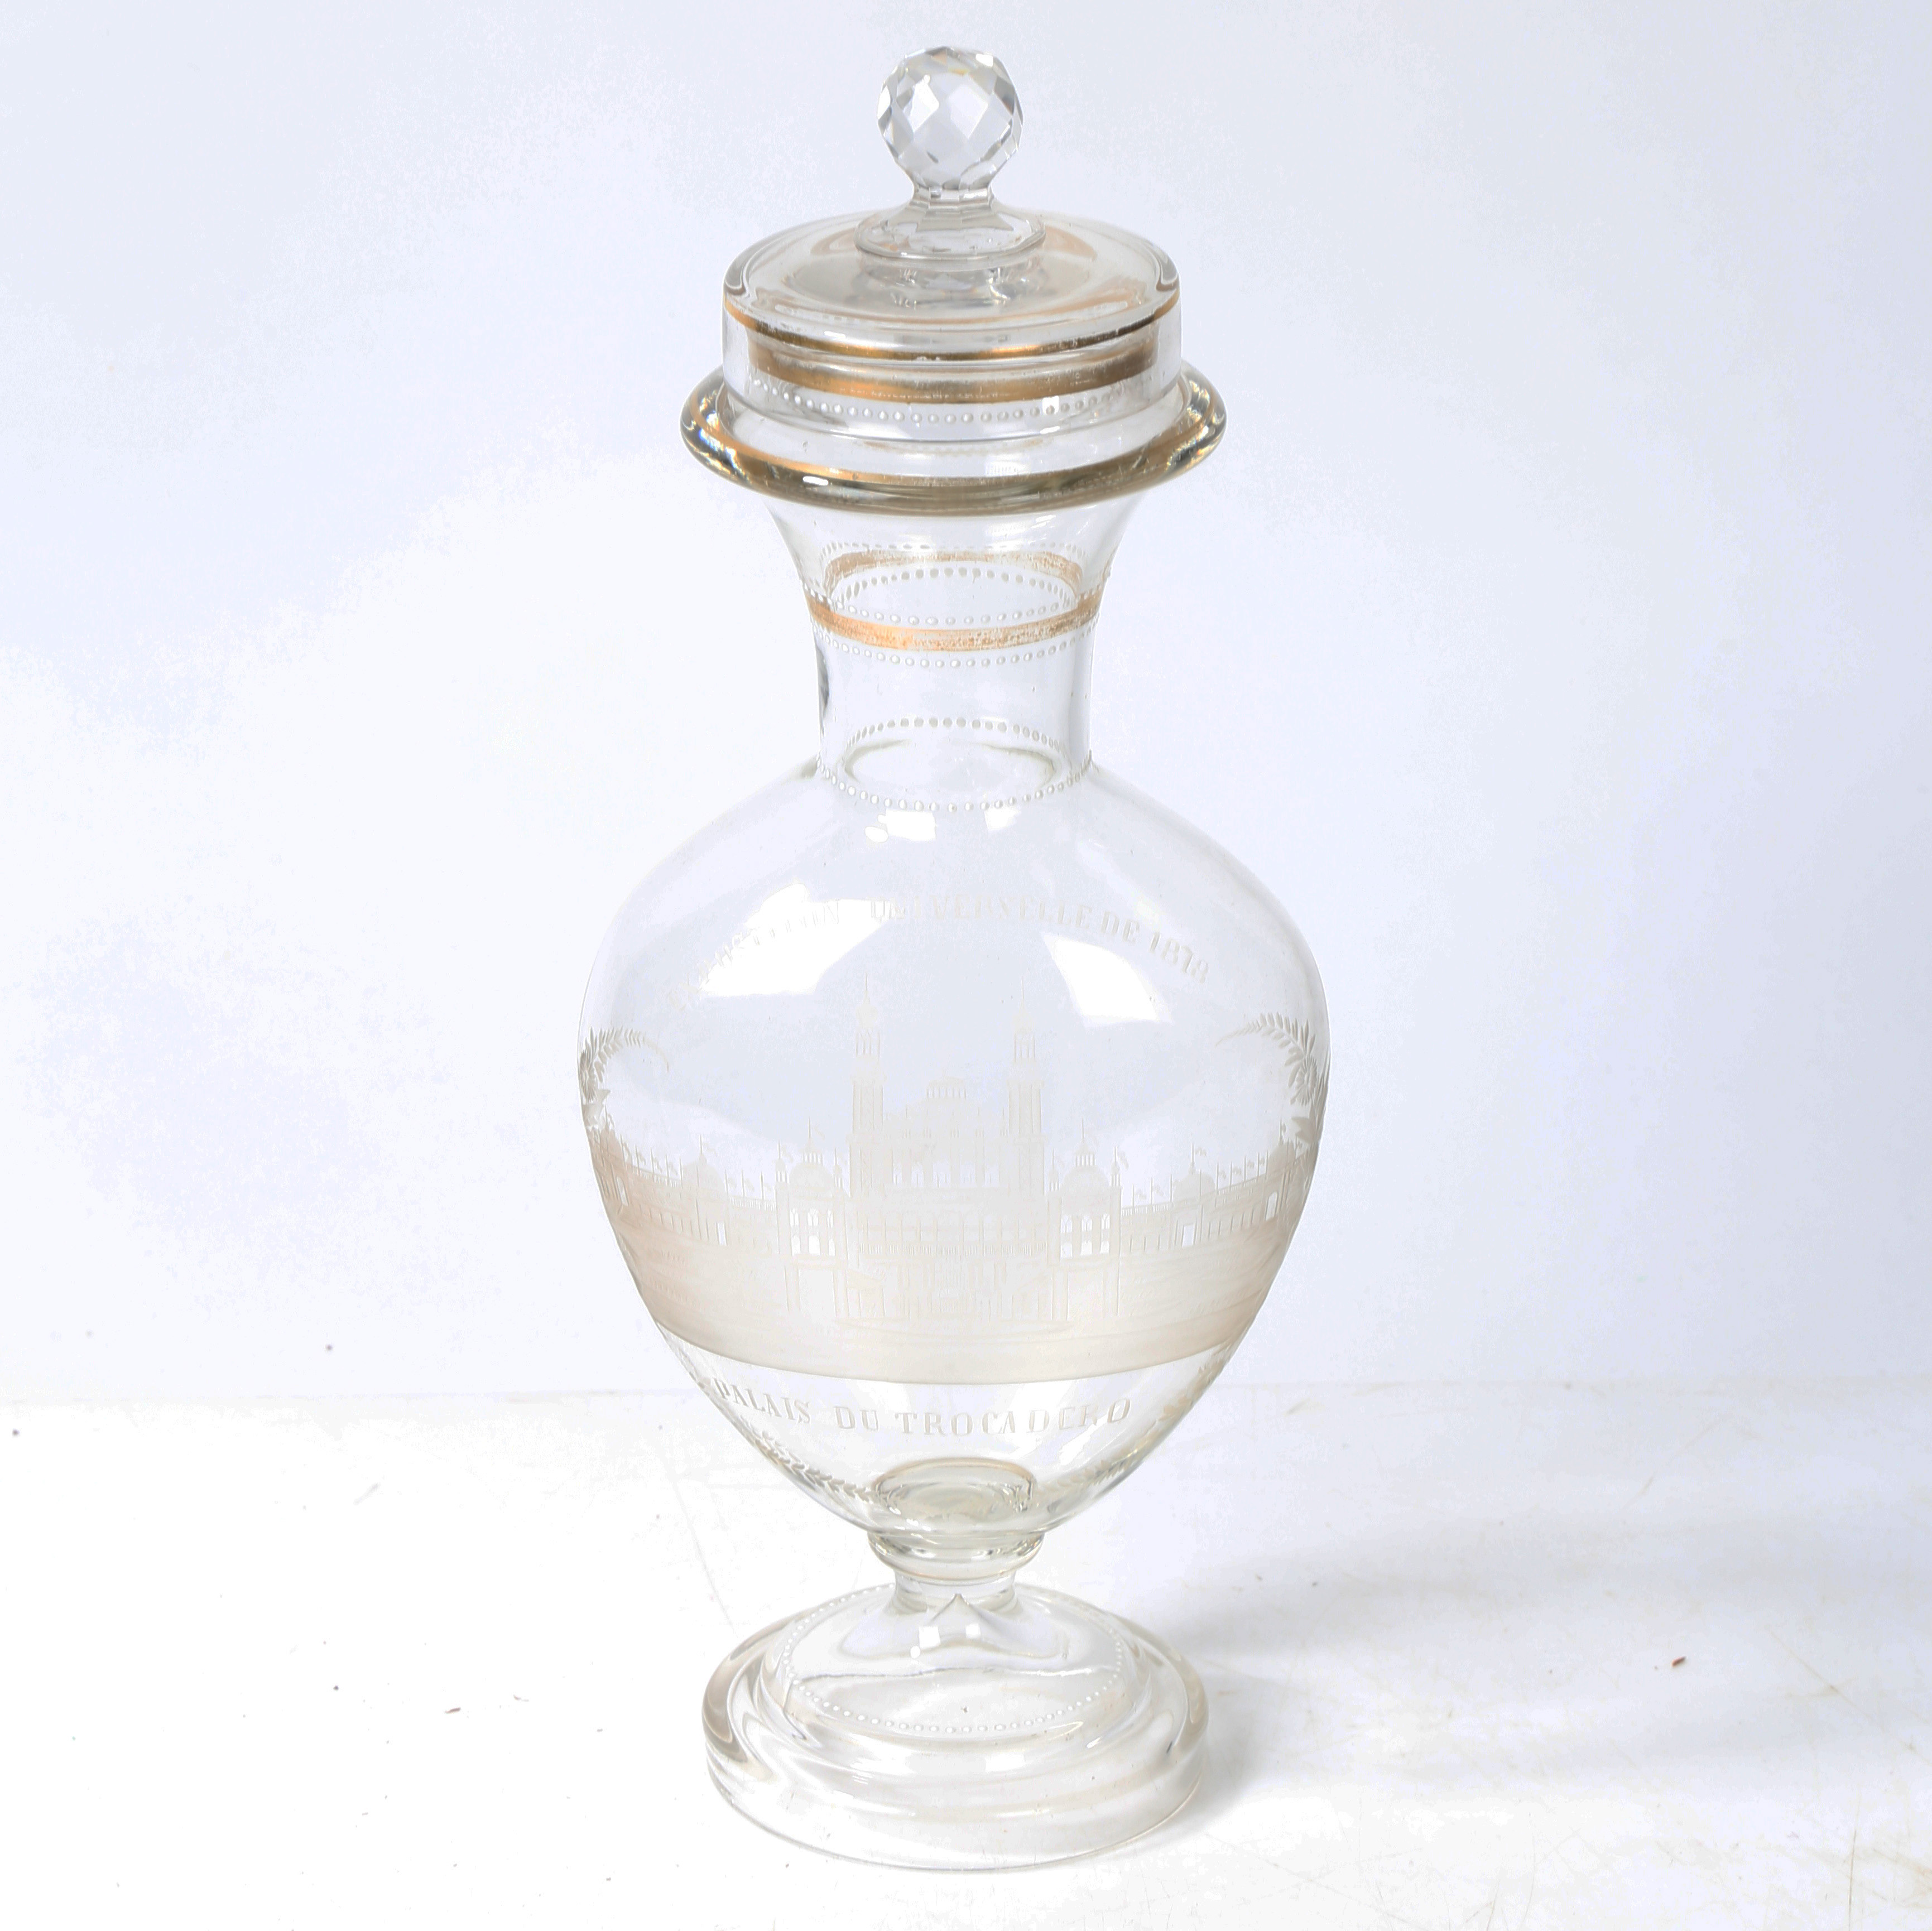 A 19TH CENTURY FRENCH COMMEMORATIVE GLASS BOTTLE.